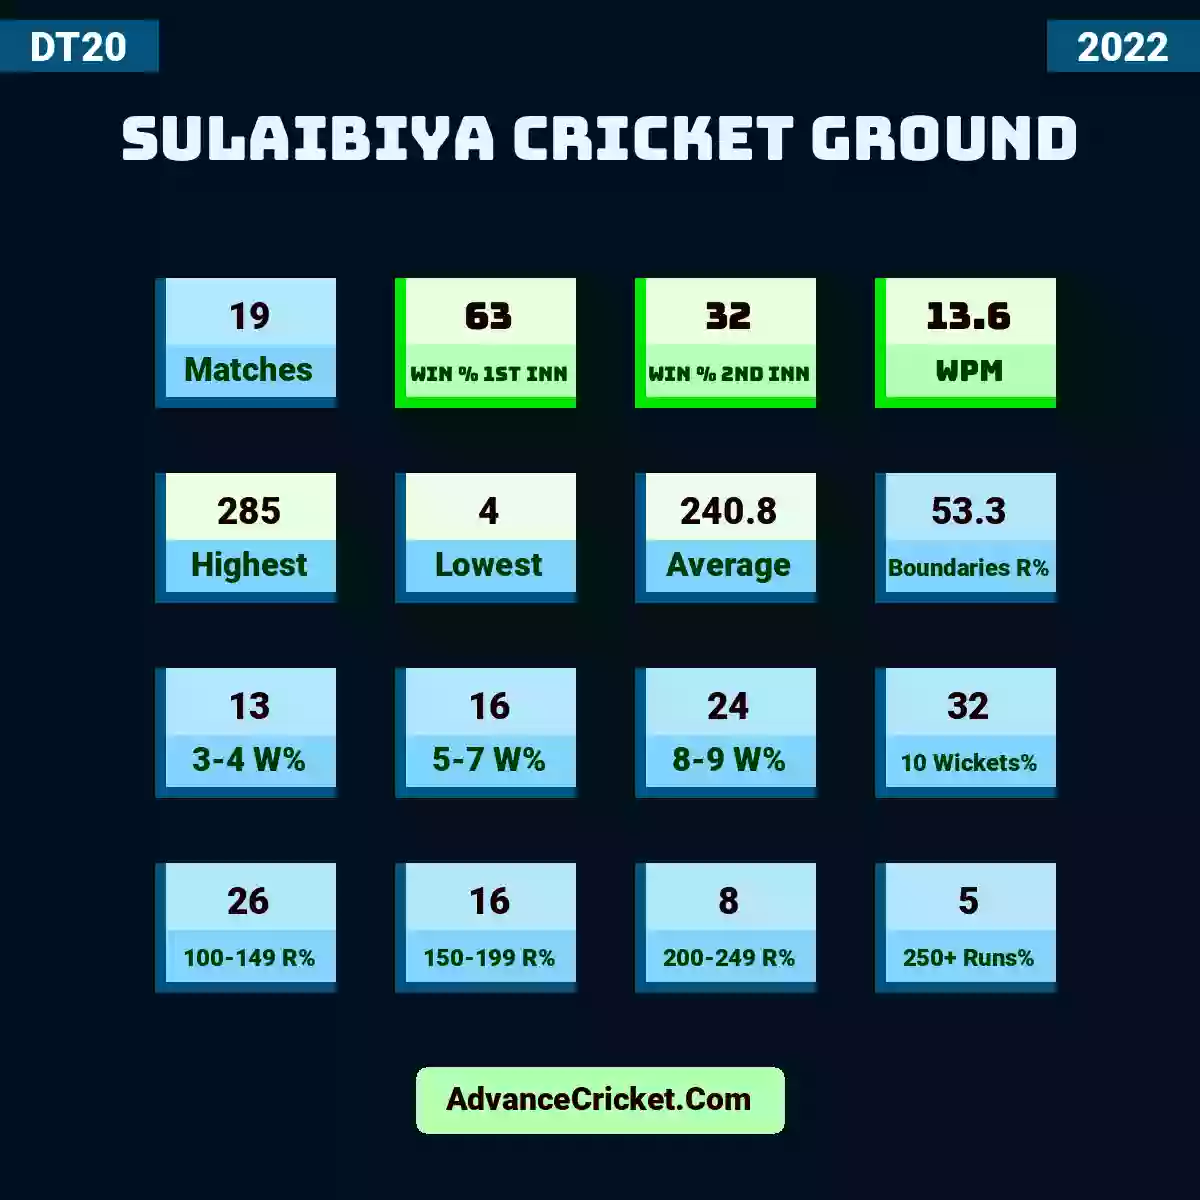 Image showing Sulaibiya Cricket Ground with Matches: 19, Win % 1st Inn: 63, Win % 2nd Inn: 32, WPM: 13.6, Highest: 285, Lowest: 4, Average: 240.8, Boundaries R%: 53.3, 3-4 W%: 13, 5-7 W%: 16, 8-9 W%: 24, 10 Wickets%: 32, 100-149 R%: 26, 150-199 R%: 16, 200-249 R%: 8, 250+ Runs%: 5.